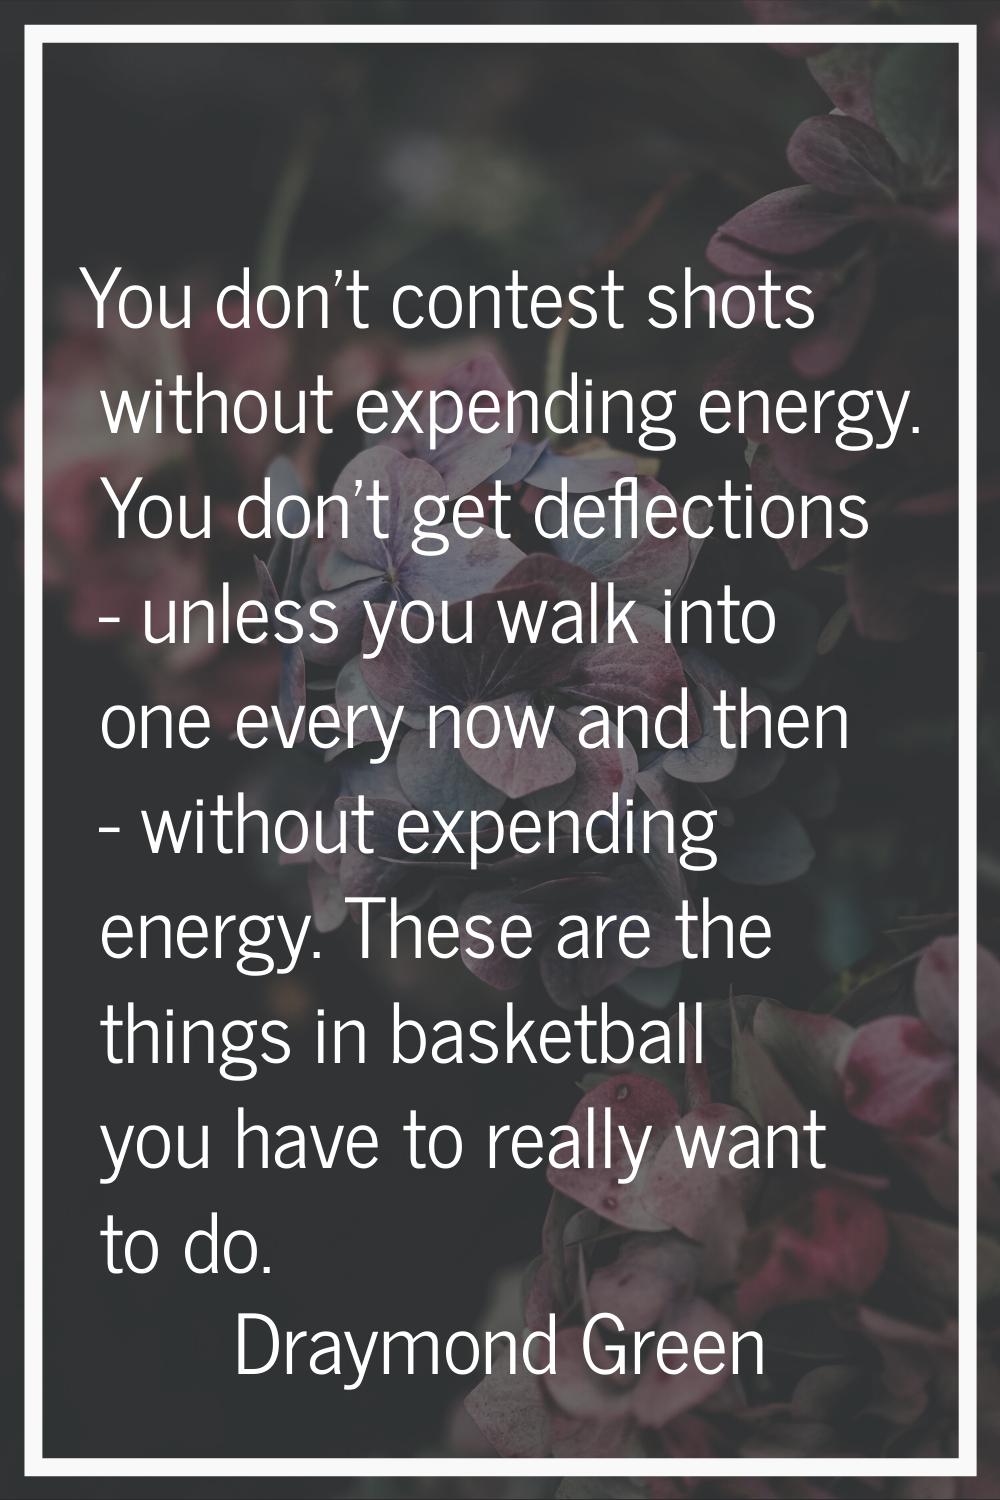 You don't contest shots without expending energy. You don't get deflections - unless you walk into 